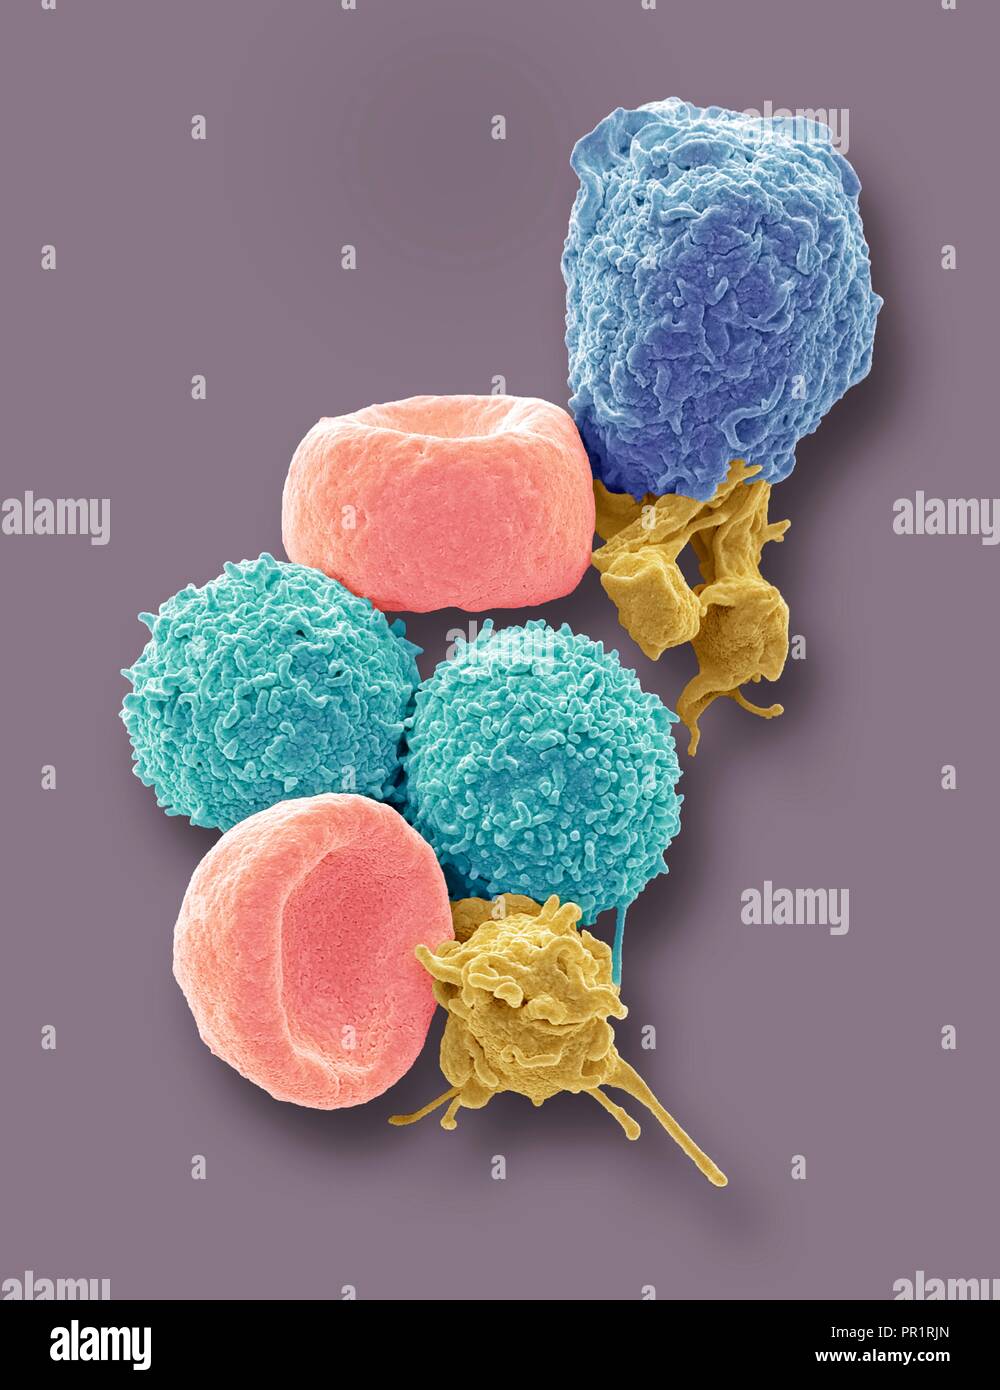 Blood cells. Coloured scanning electron micrograph (SEM) of human red blood cells (erythrocytes, red), white blood cells (leukocytes, blue and cyan), and platelets (thrombocytes, yellow). The disc-shaped, biconcave erythrocytes transport oxygen to the body's cells and remove carbon dioxide to the lungs. Leukocytes are part of the immune system, defending the body against infection by ingesting pathogens by phagocytosis or by producing antibodies. Magnification: x5000 when printed 10 centimetres high. Stock Photo